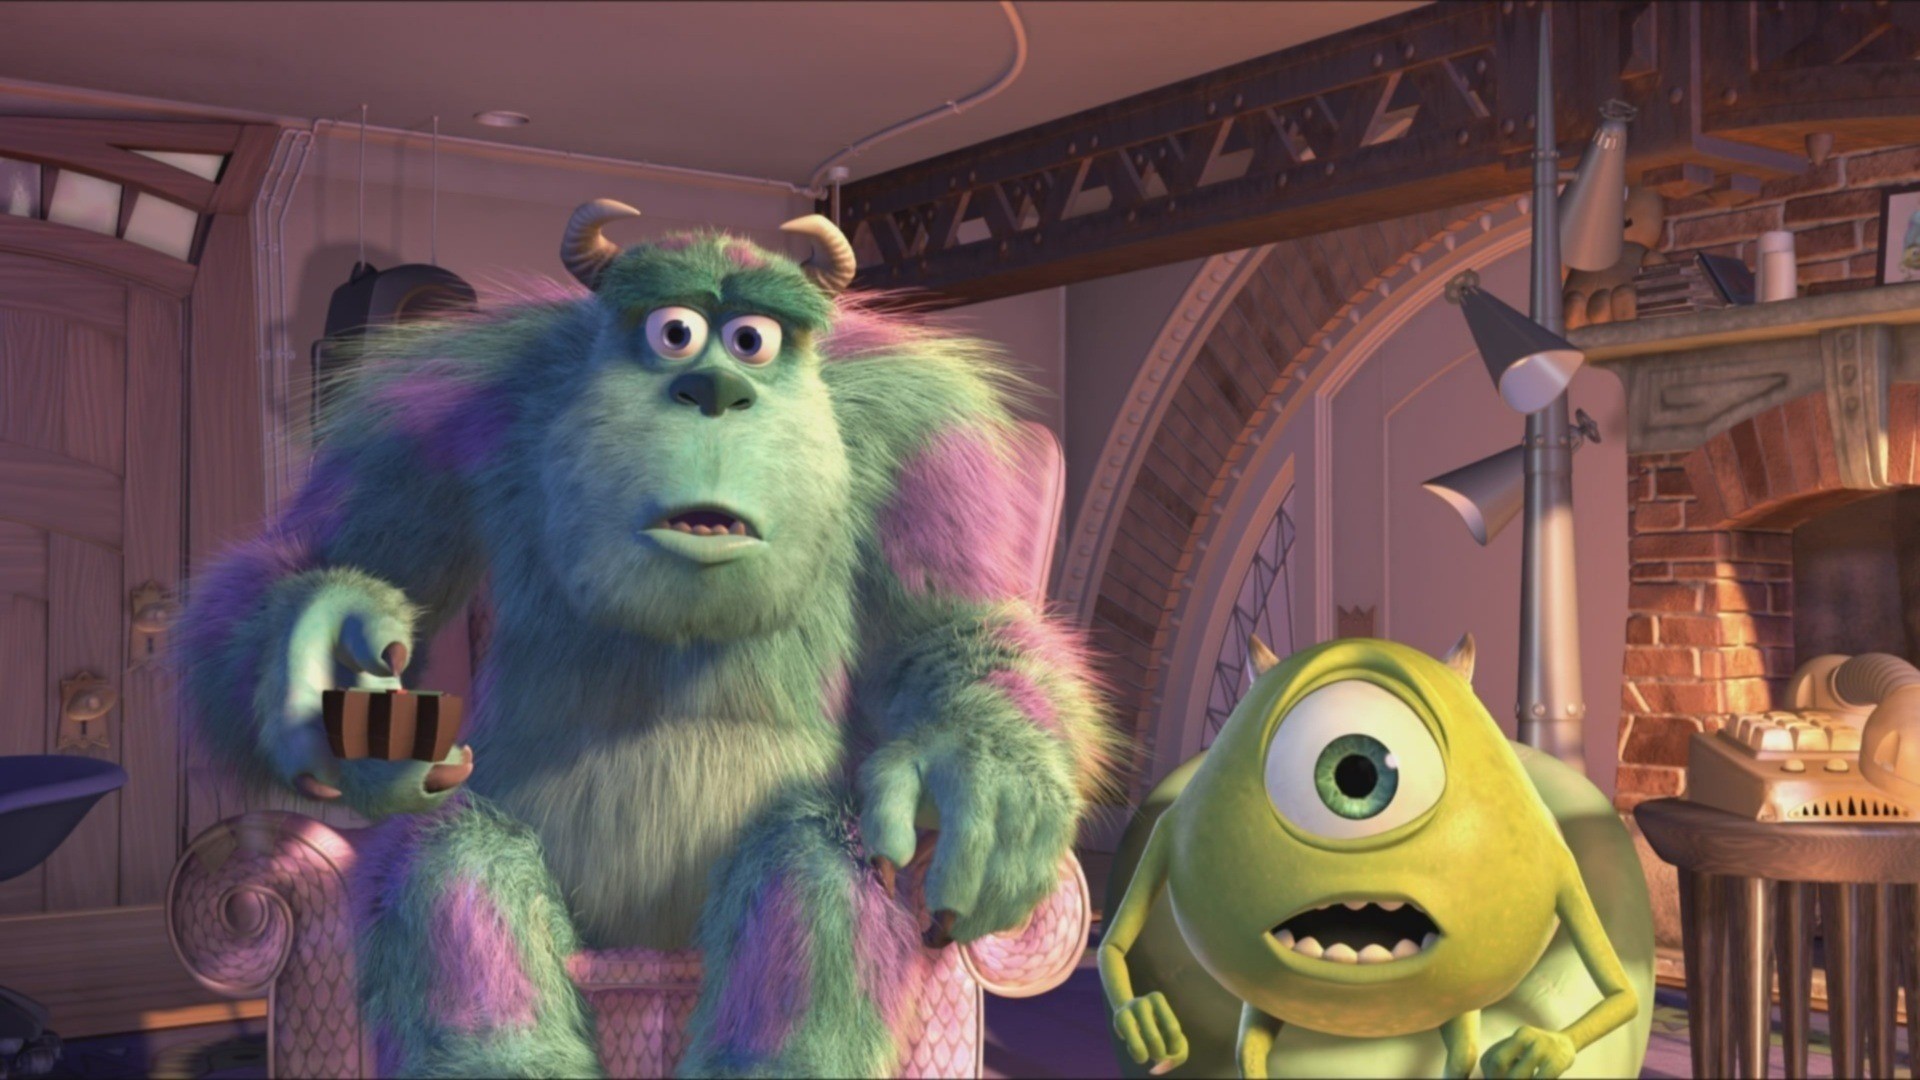 General 1920x1080 movies Monsters, Inc. animated movies